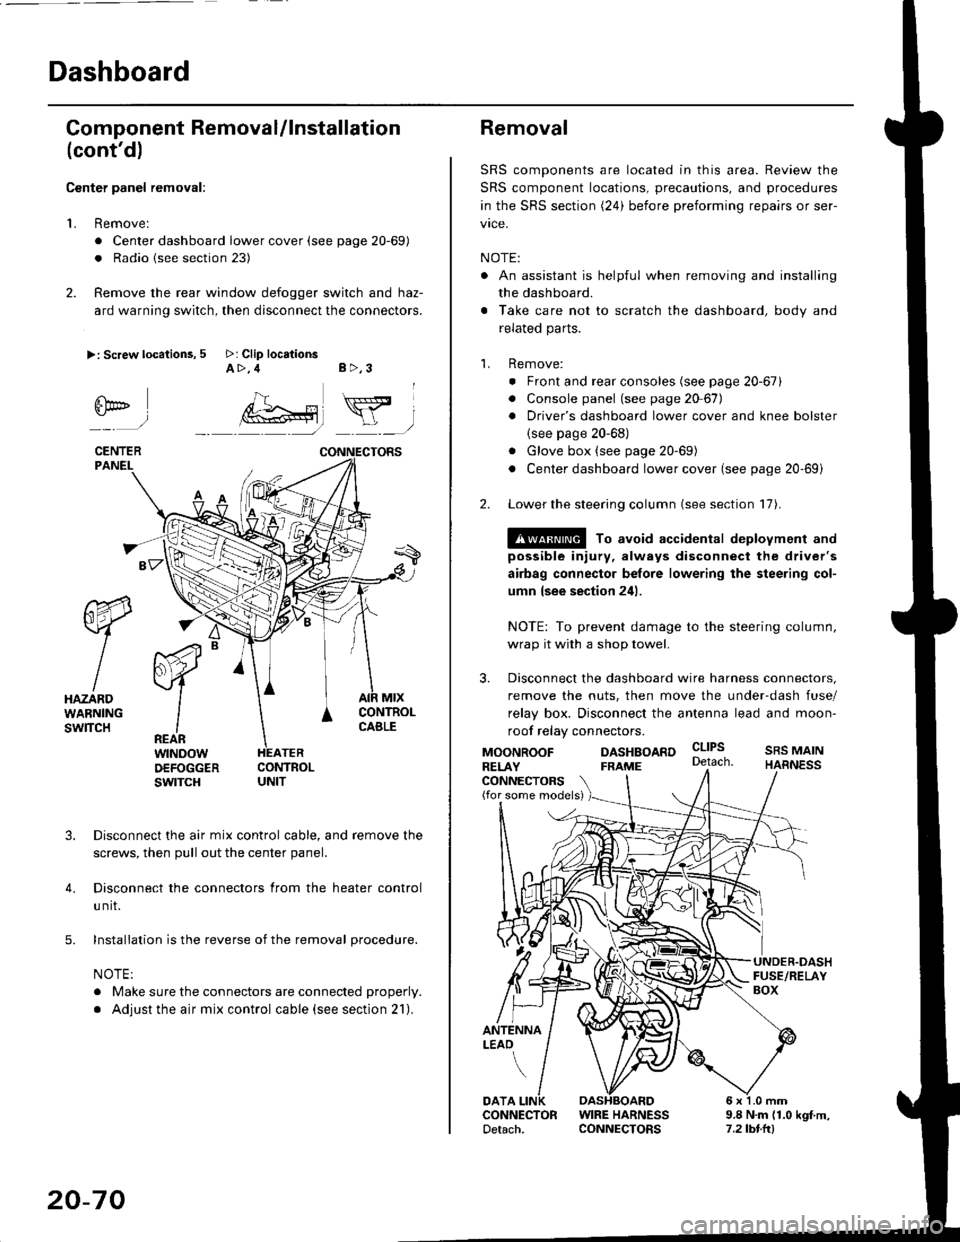 HONDA CIVIC 1999 6.G Service Manual Dashboard
Gomponent Removal/lnstallation
(contd)
Center panel removal:
1. Remove:
. Center dashboard lower cover (see page 20-69)
. Radio {see section 23)
2. Remove the rear window defogger switch an